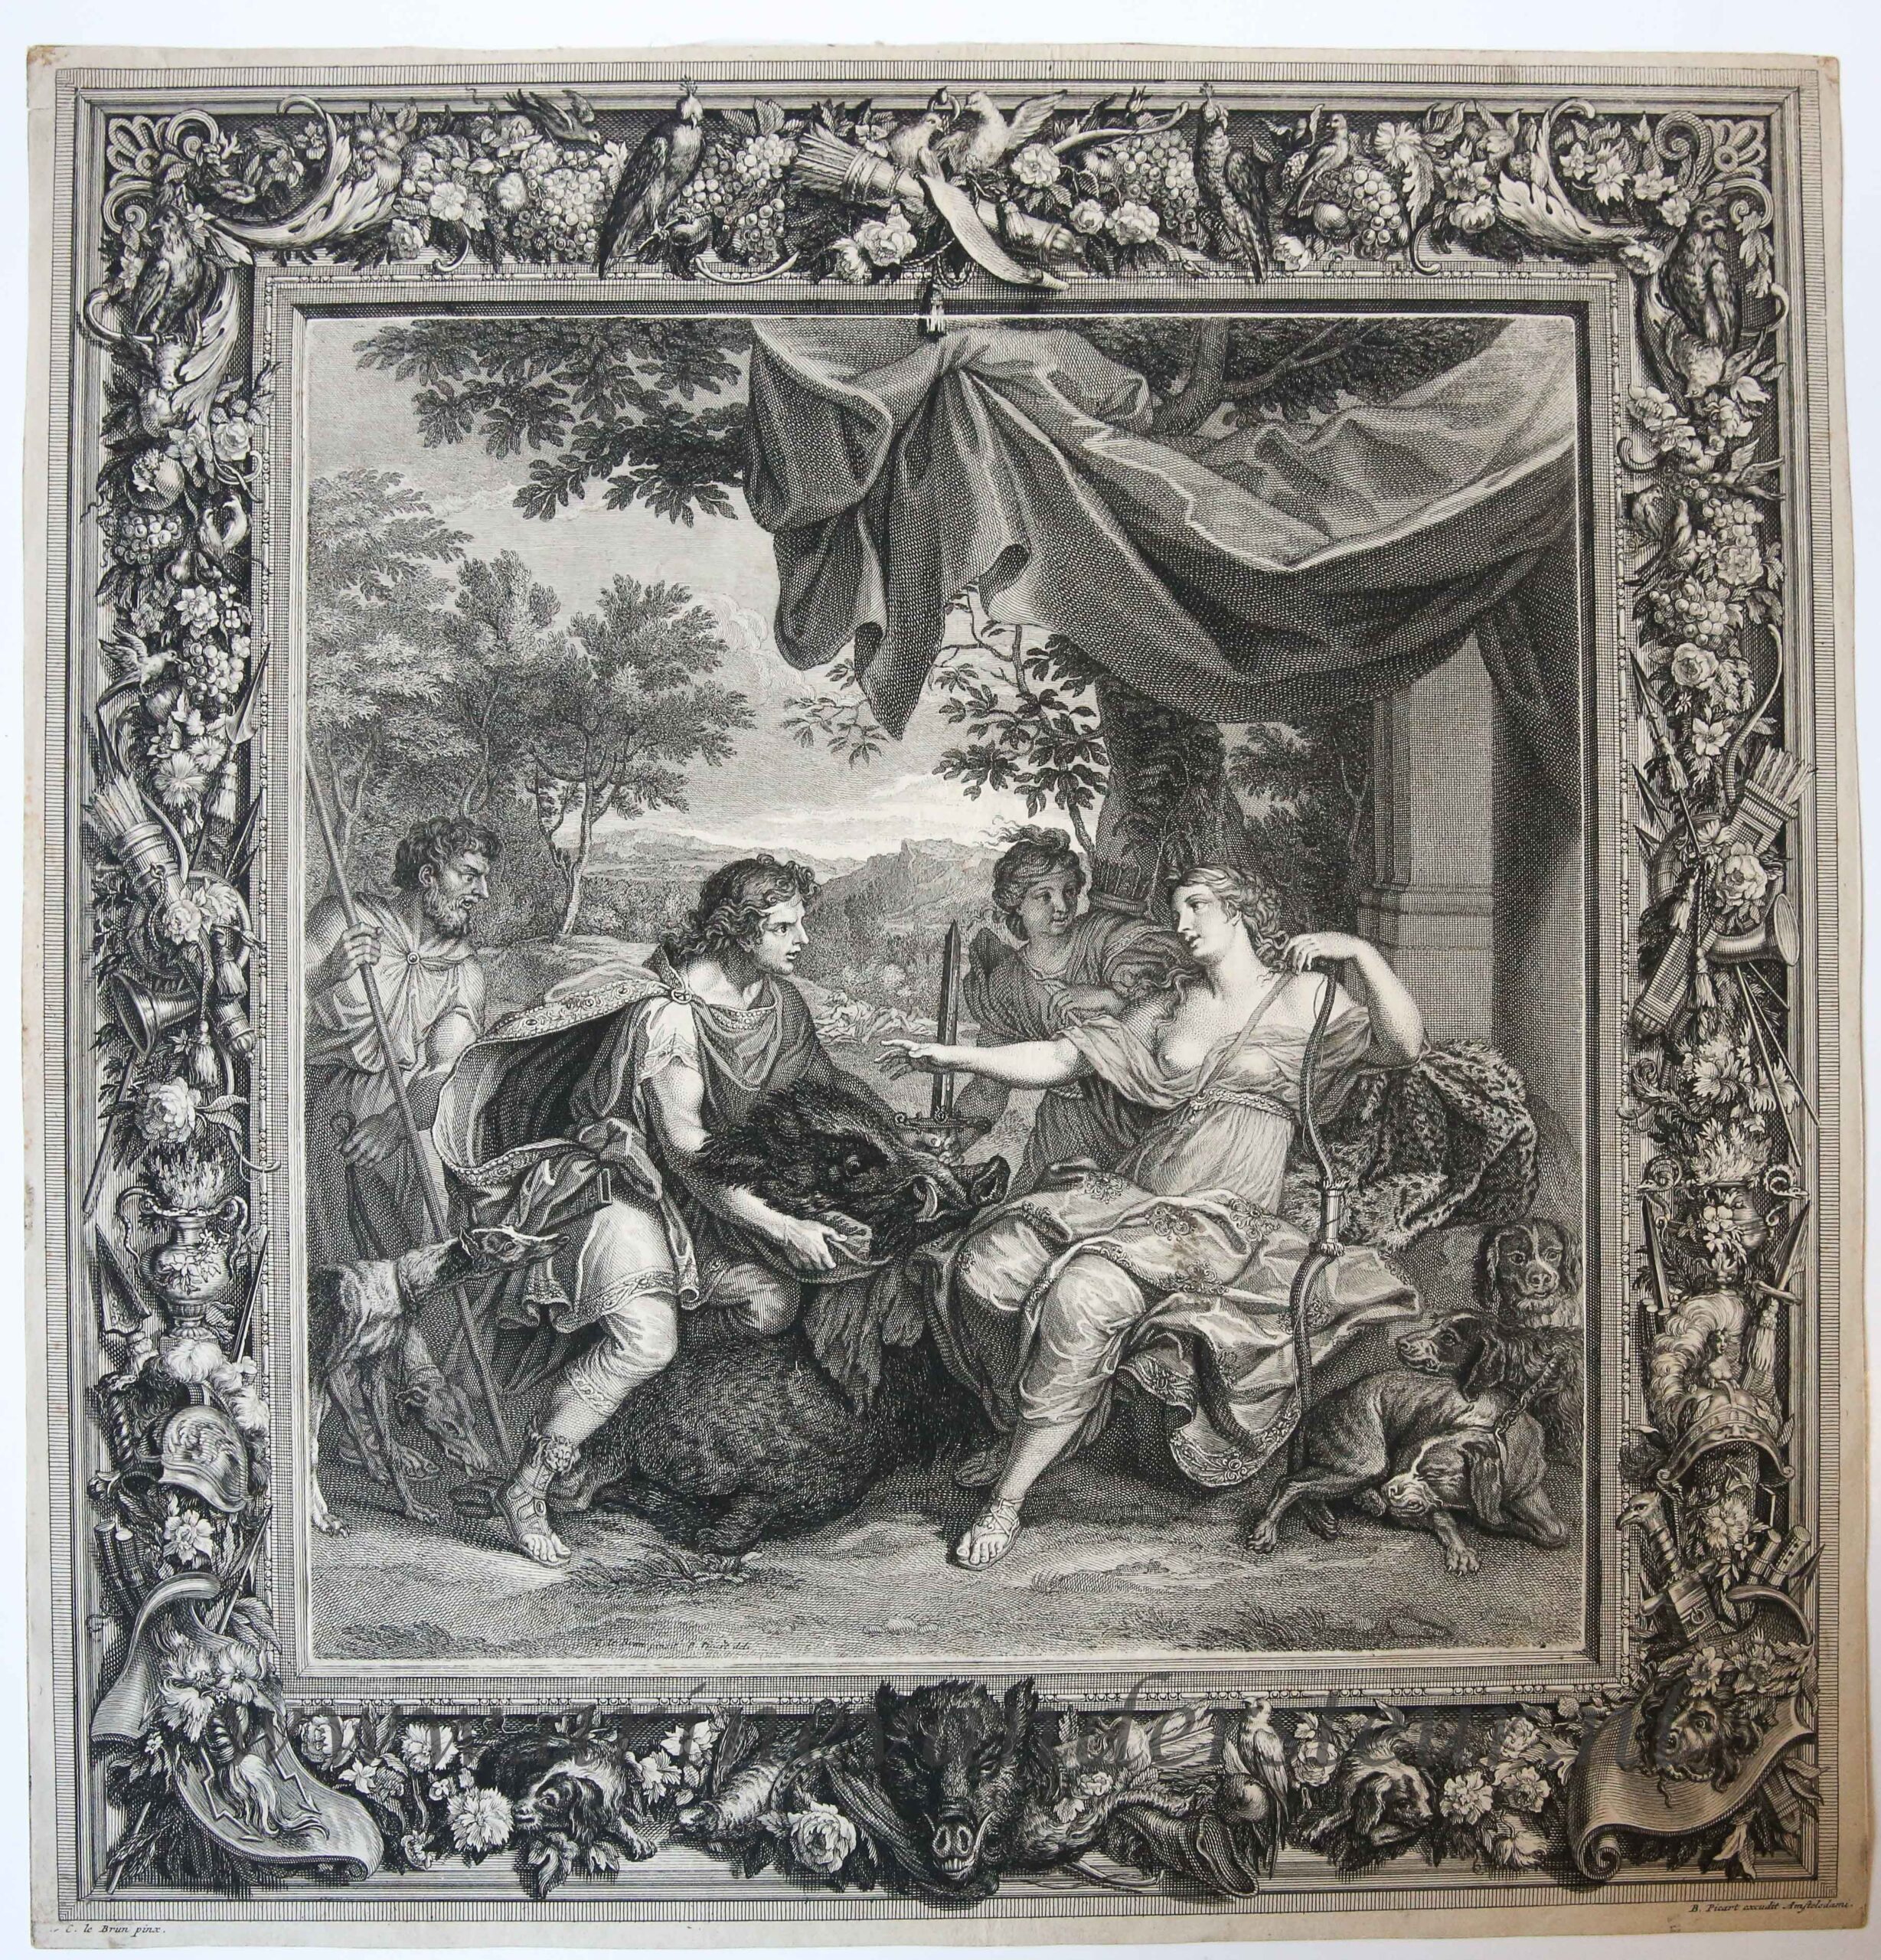 [Antique print, etching] Meleager and Atalanta (tapisserie of the Duc d'Orleans), published 1720.